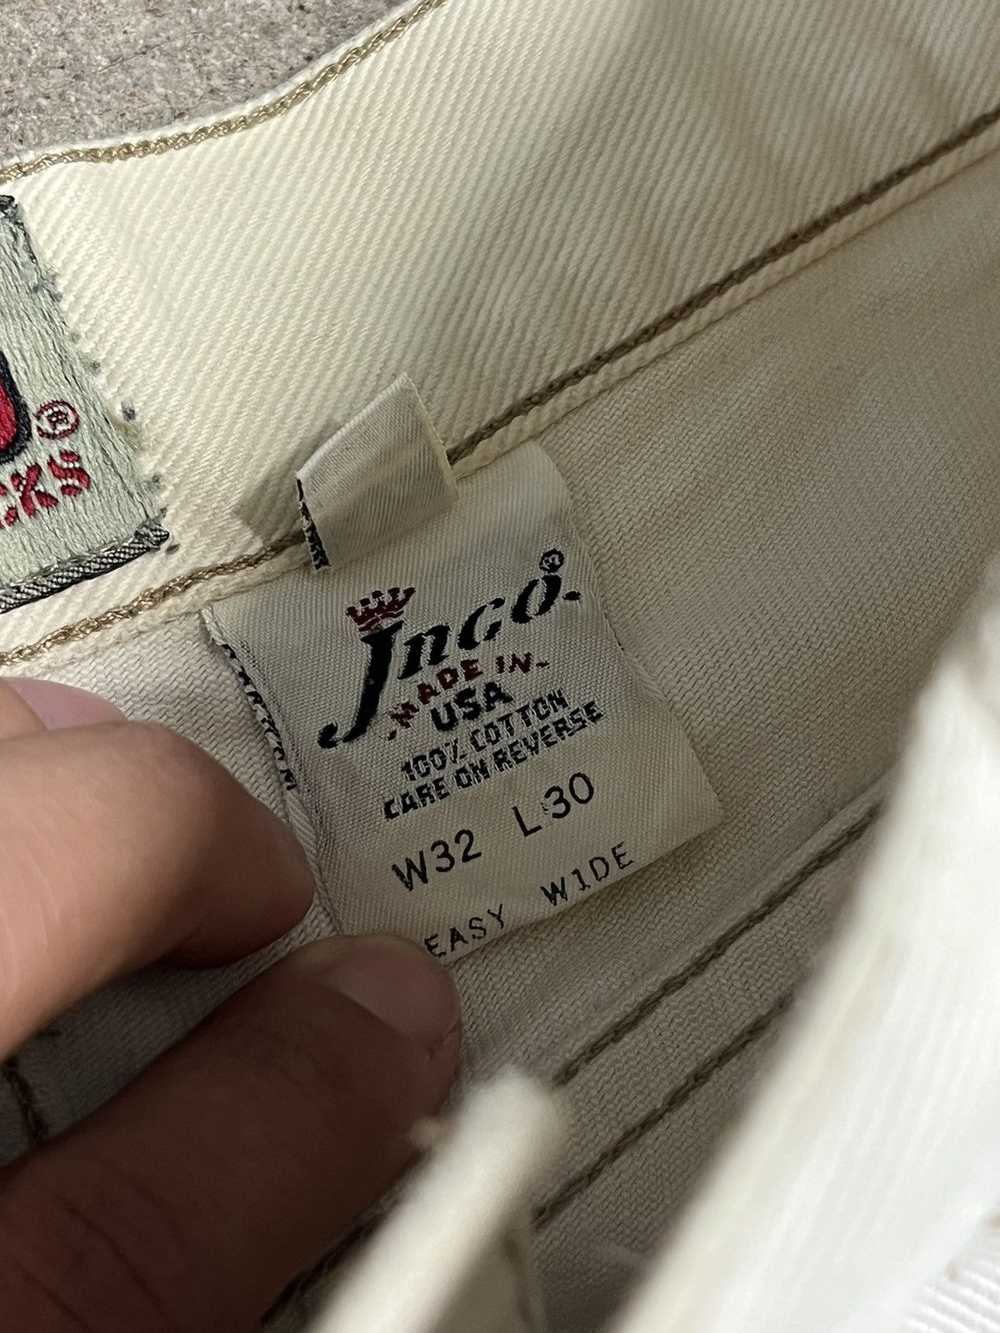 Jnco 179 Easy Wide Jeans - image 8